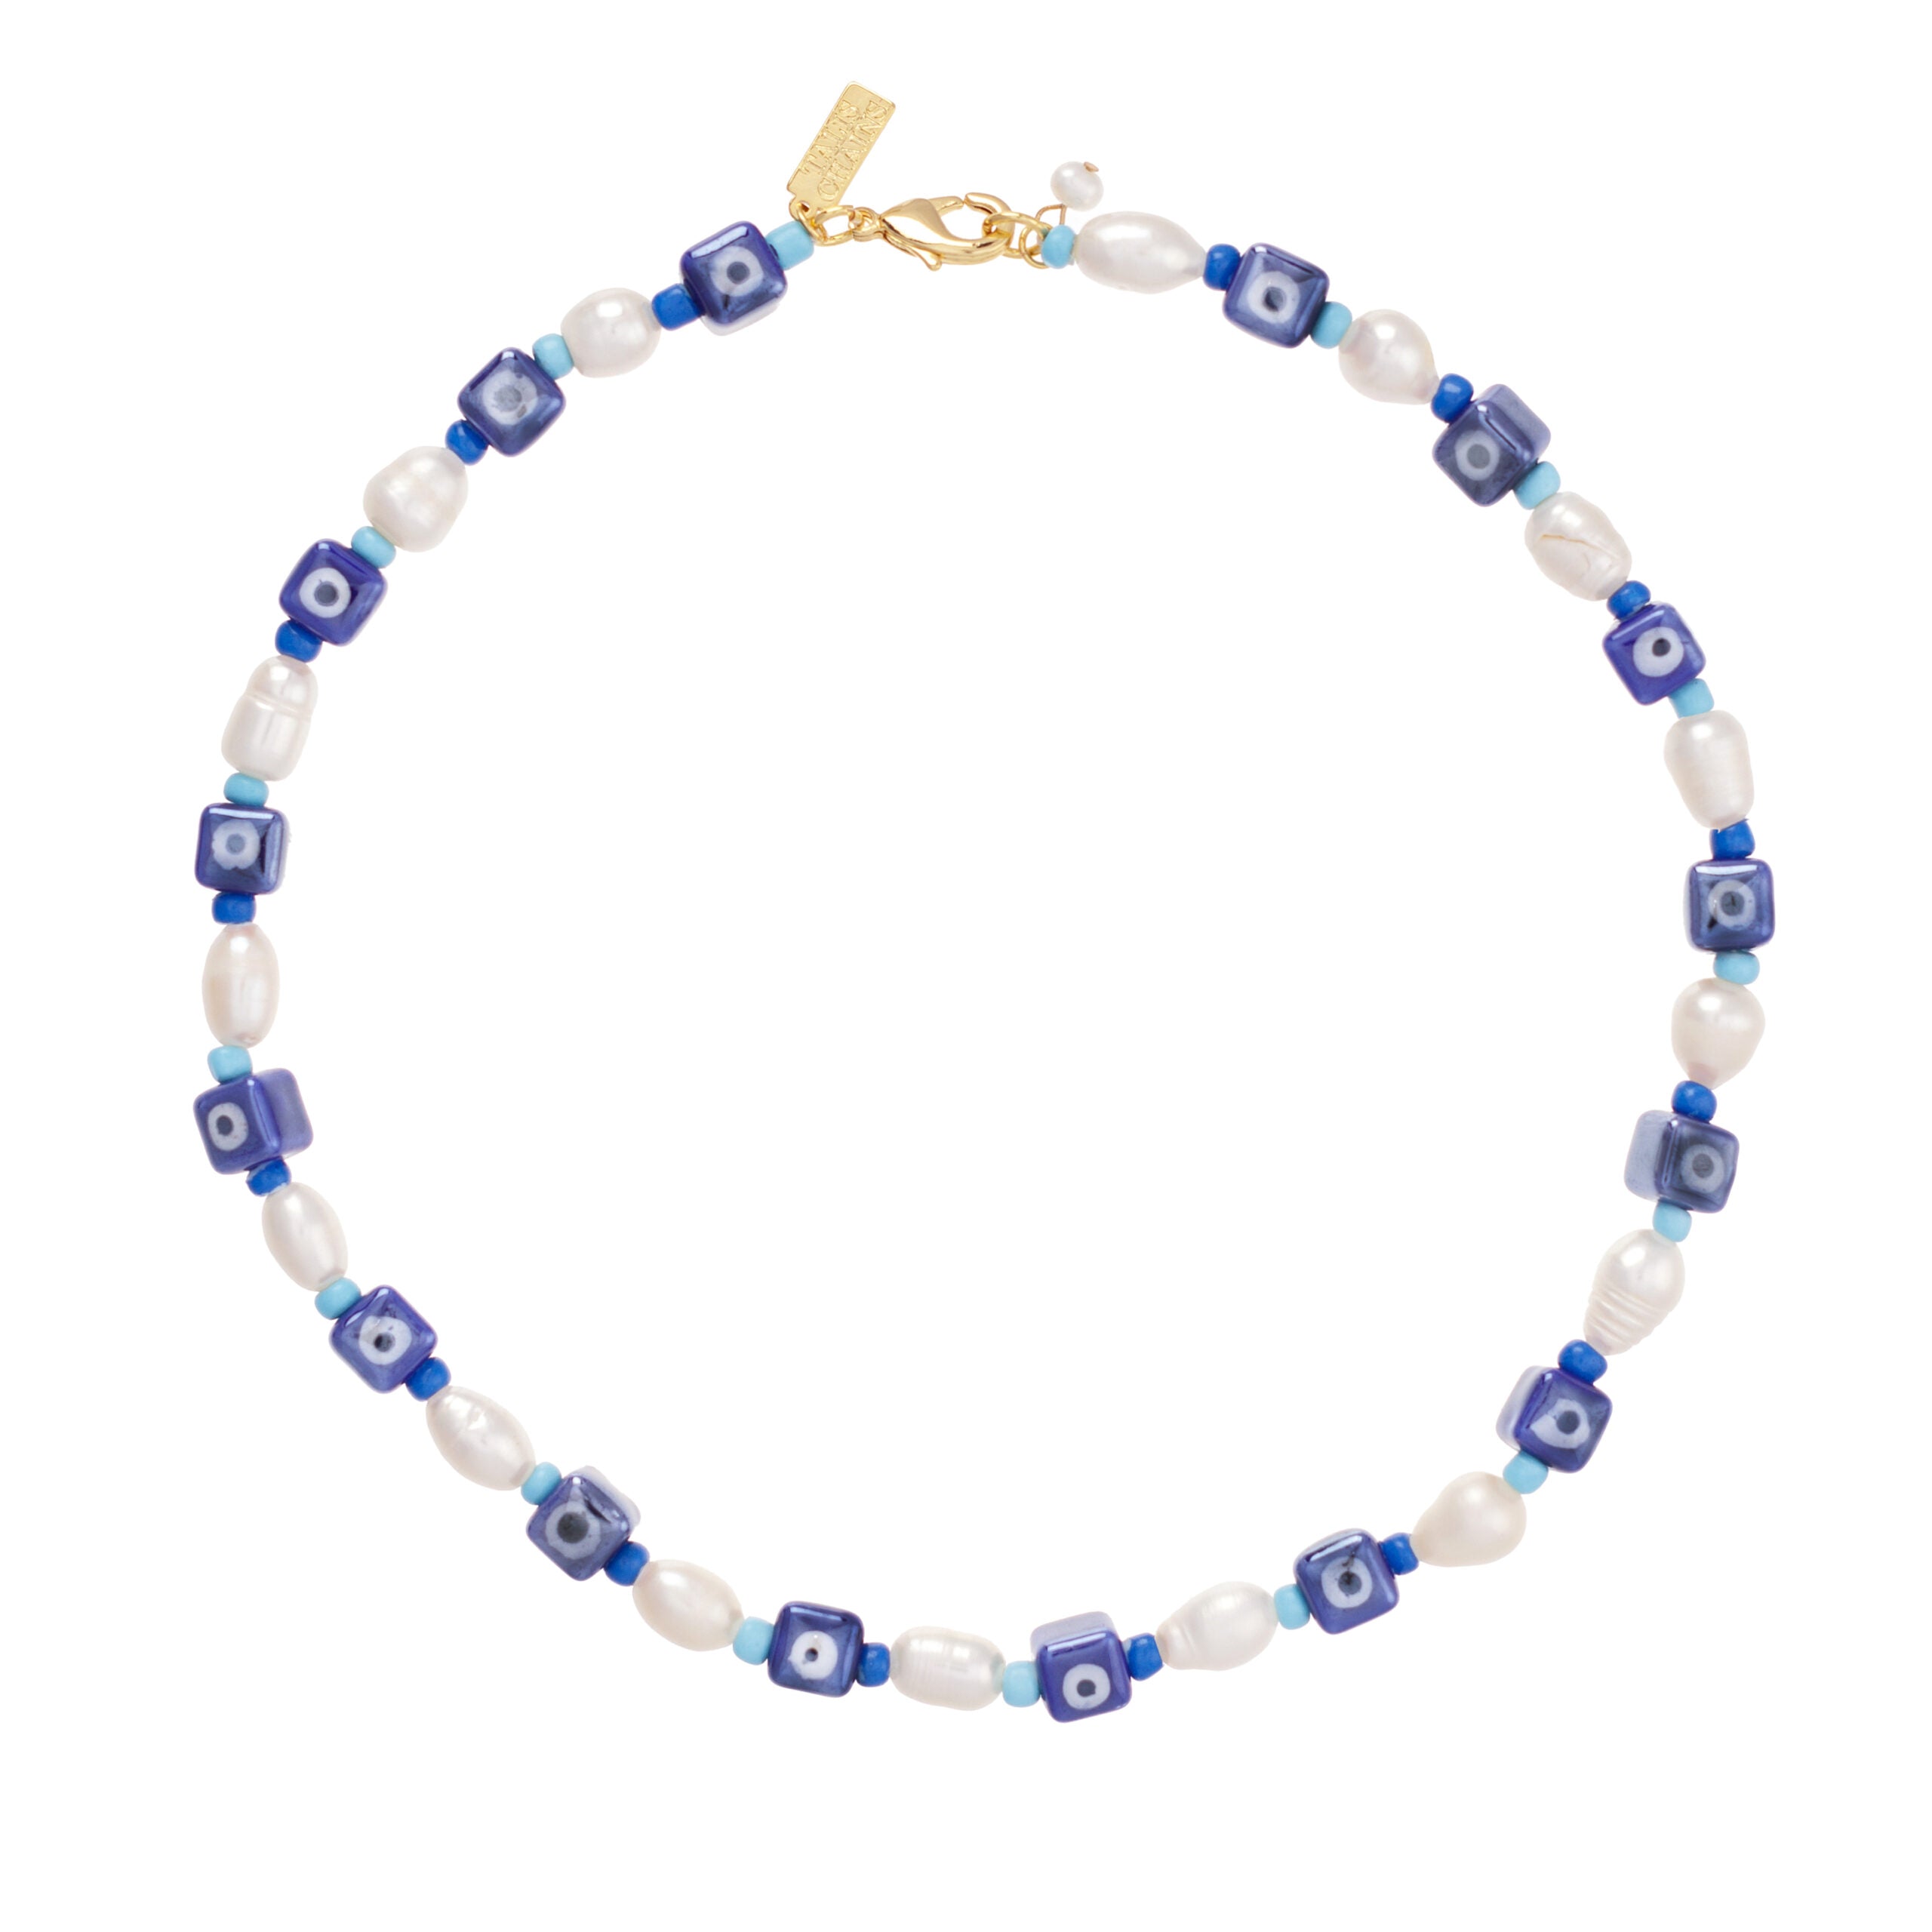 Talis Chains Eye Spy Pearl Necklace- Navy